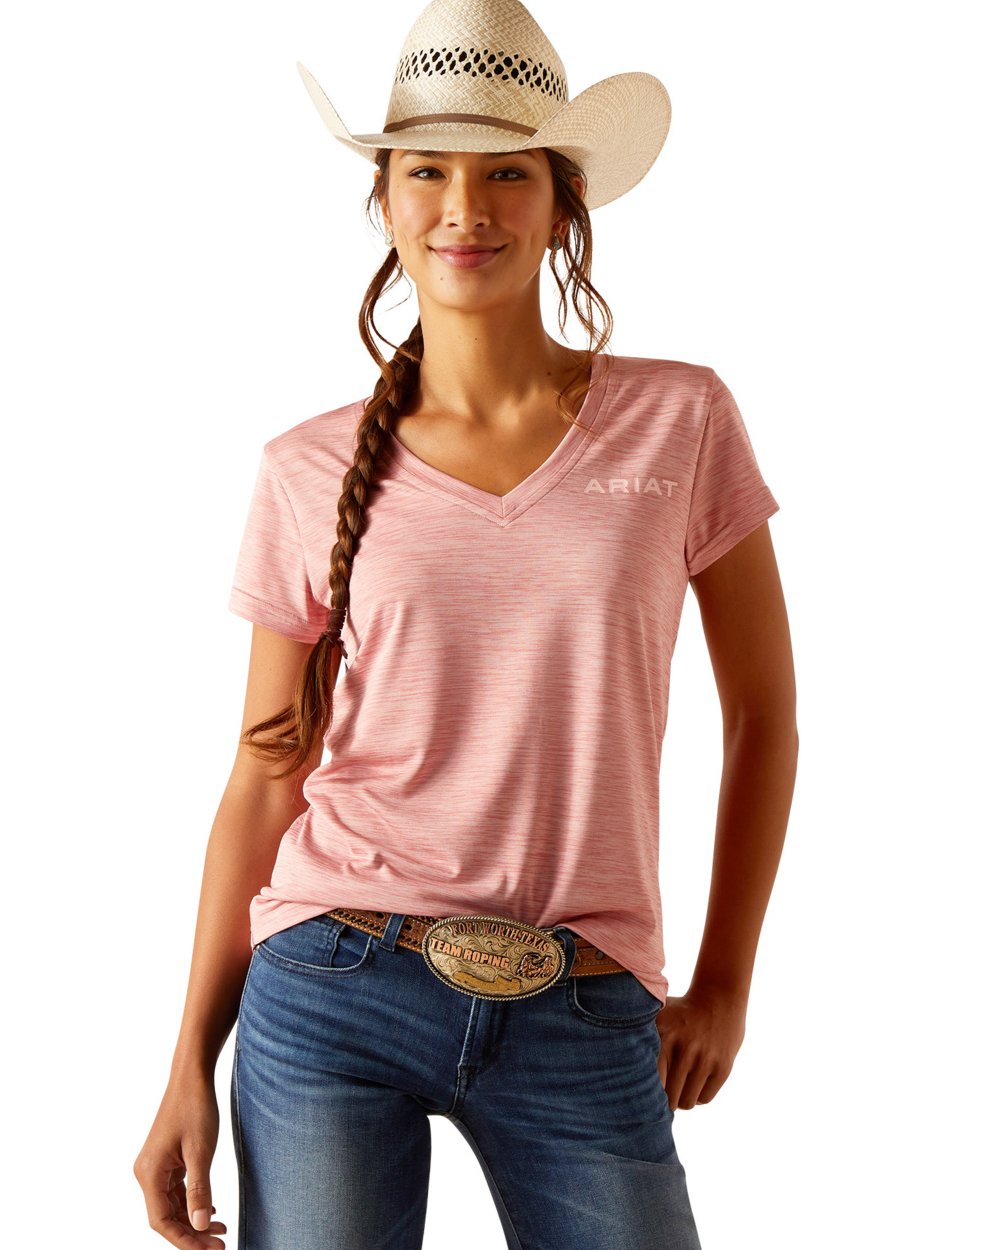 Dusty Rose Coloured Ariat Womens Laguna Logo Short Sleeve Top On A White Background 